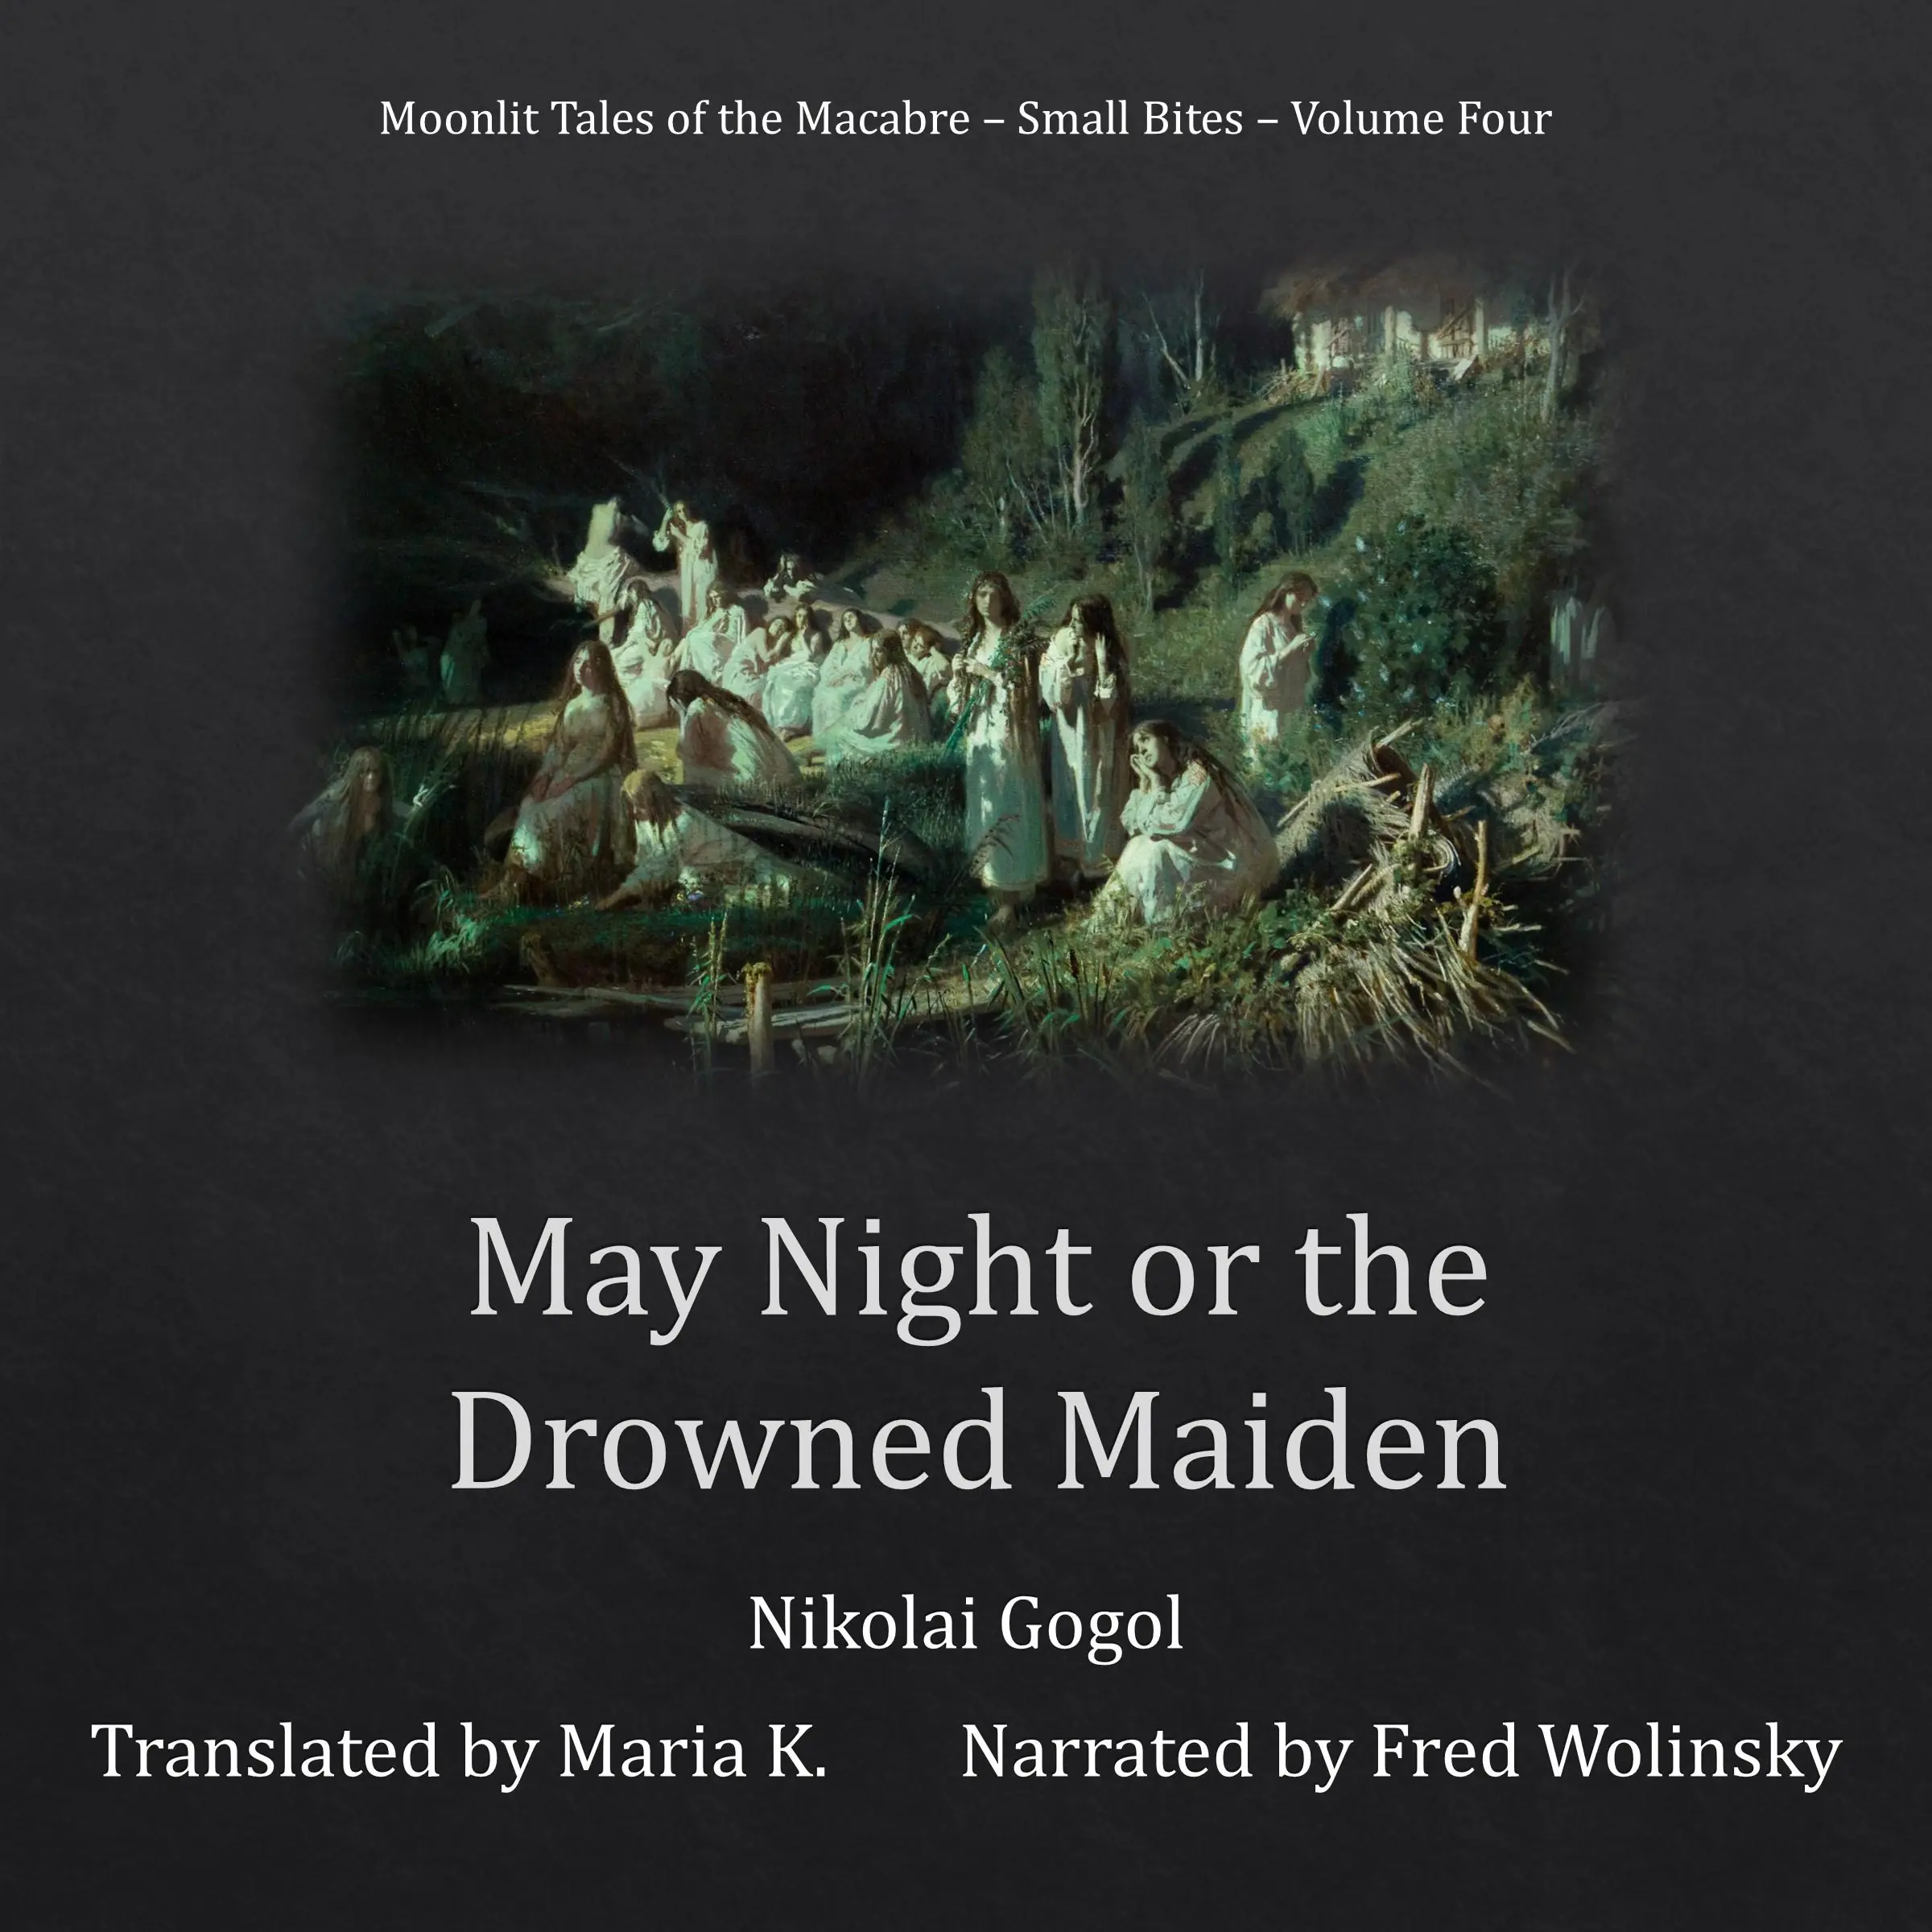 May Night or the Drowned Maiden (Moonlit Tales of the Macabre - Small Bites Book 4) by Nikolai Gogol Audiobook